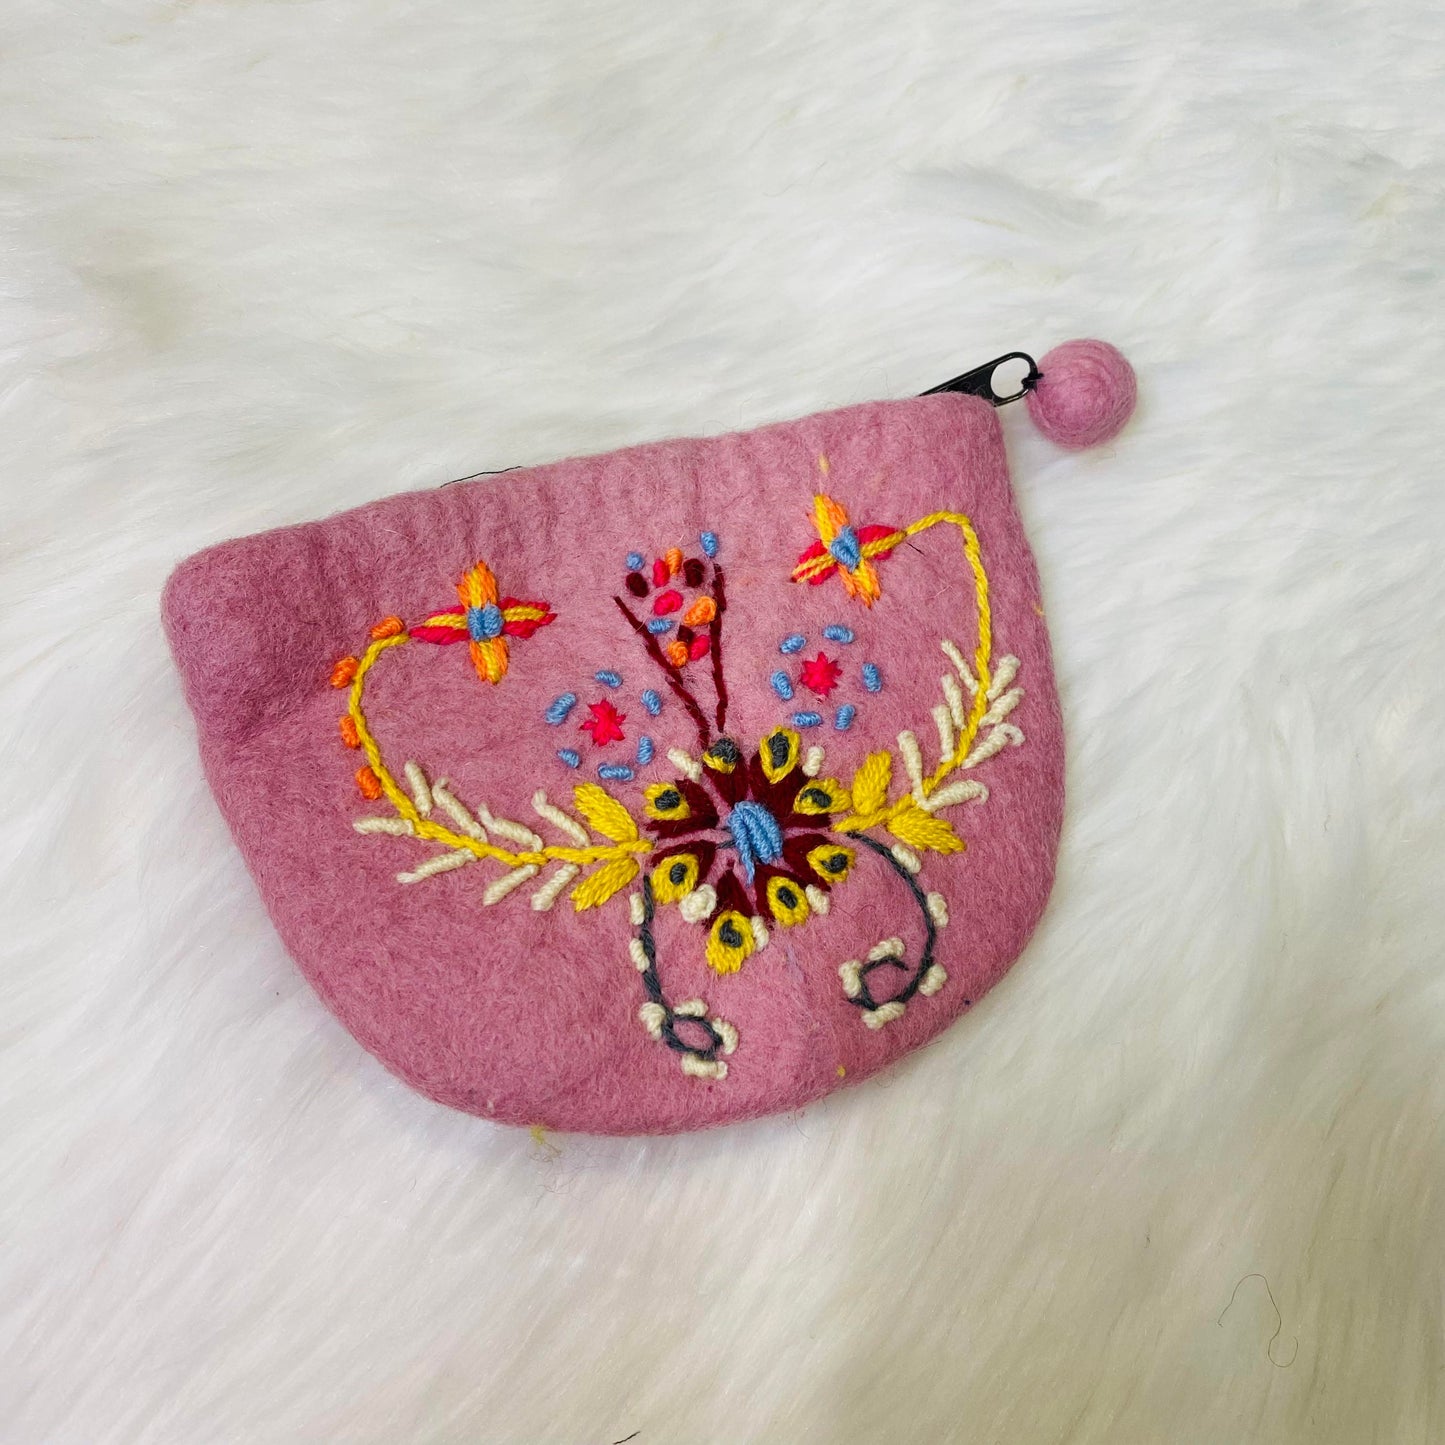 Handmade Felted Floral Embroidery Purse